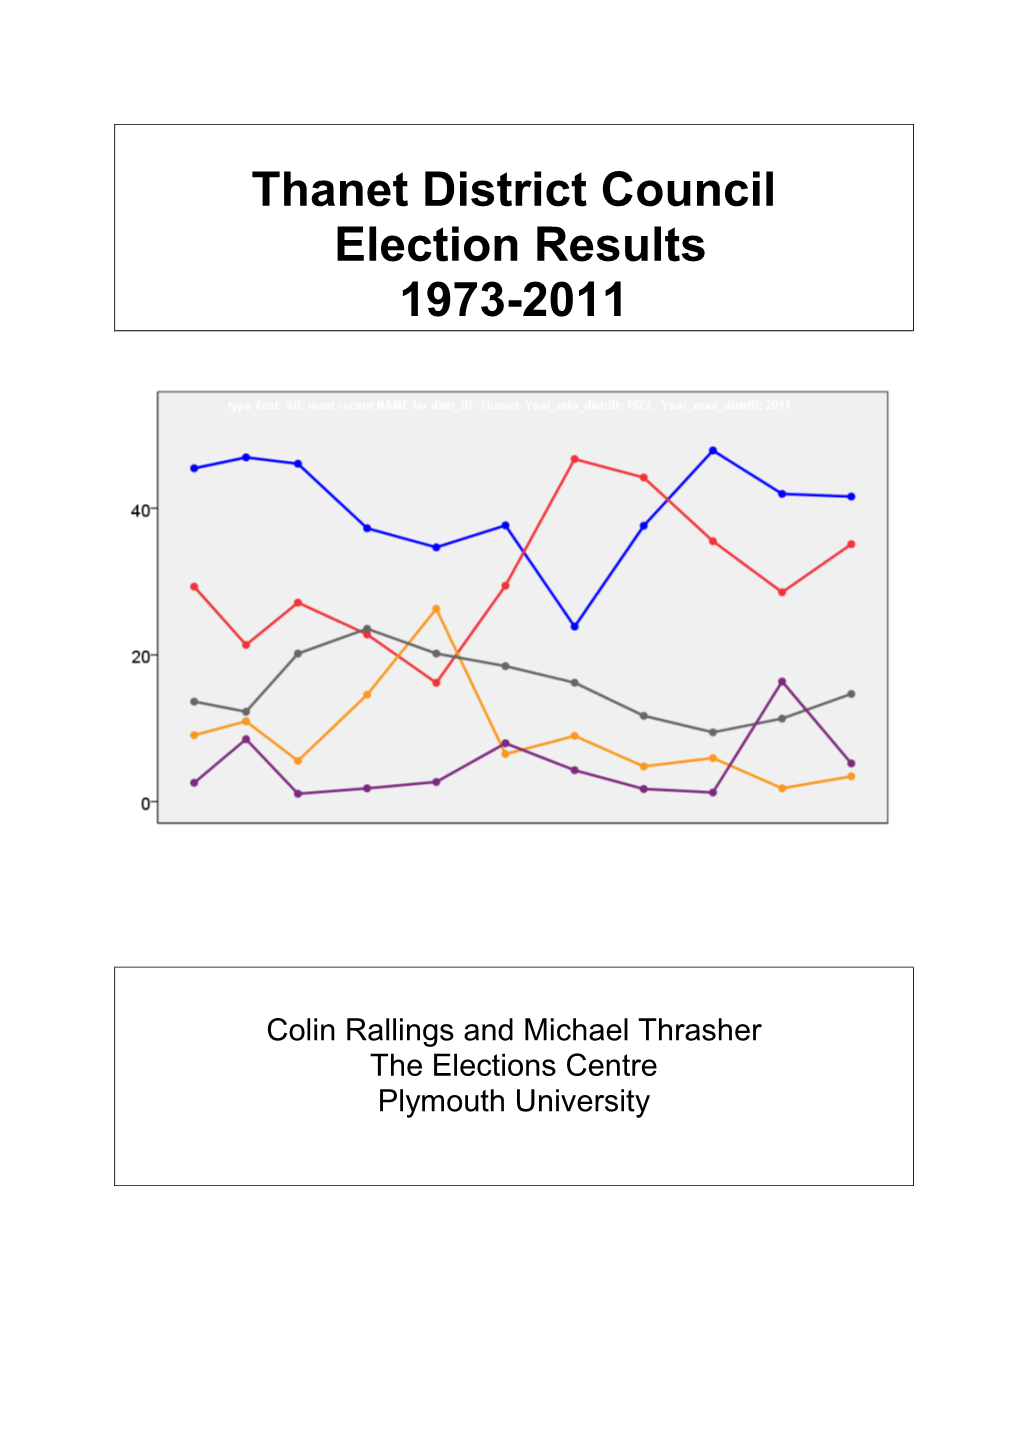 Thanet District Council Election Results 1973-2011